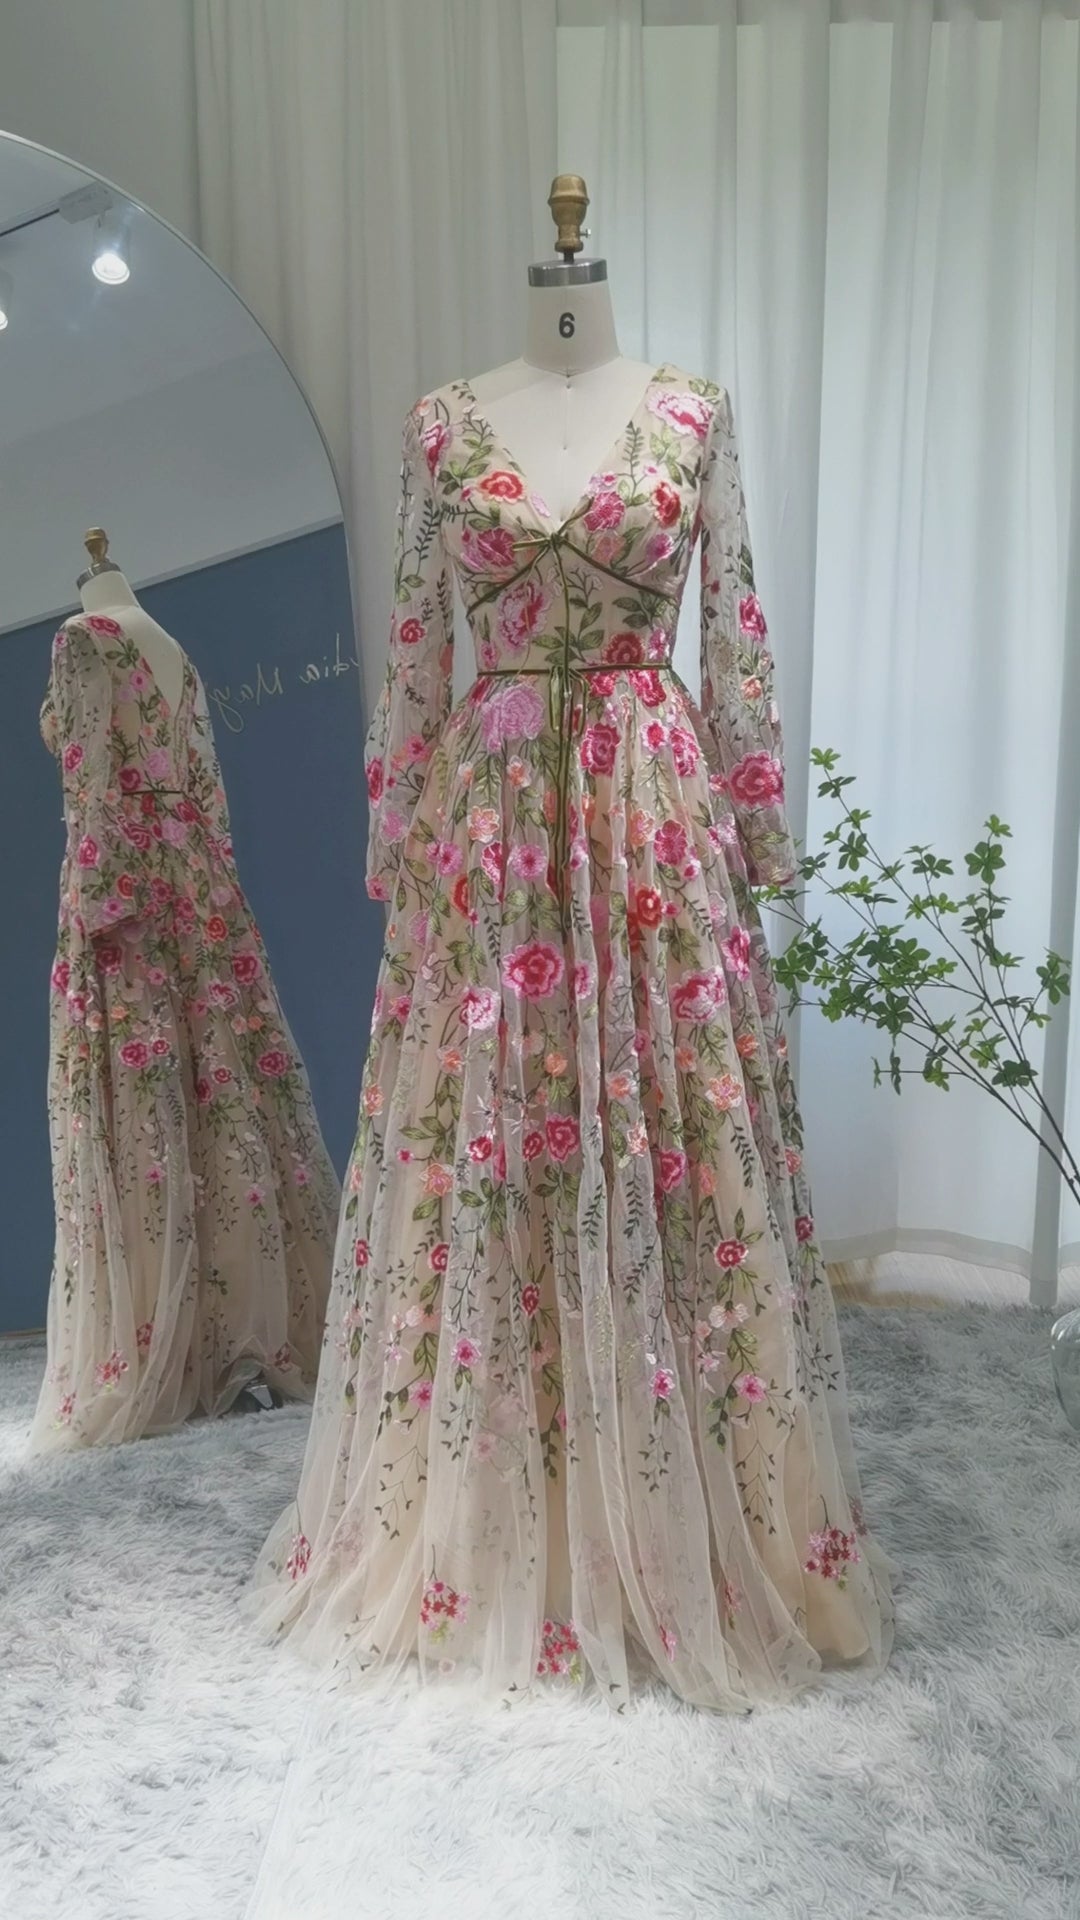 Dreamy Vow Champagne Embroidery Long Evening Dresses 2023 Garden Floral Tulle A-line Formal Prom Dress for Women Wedding Party SS231